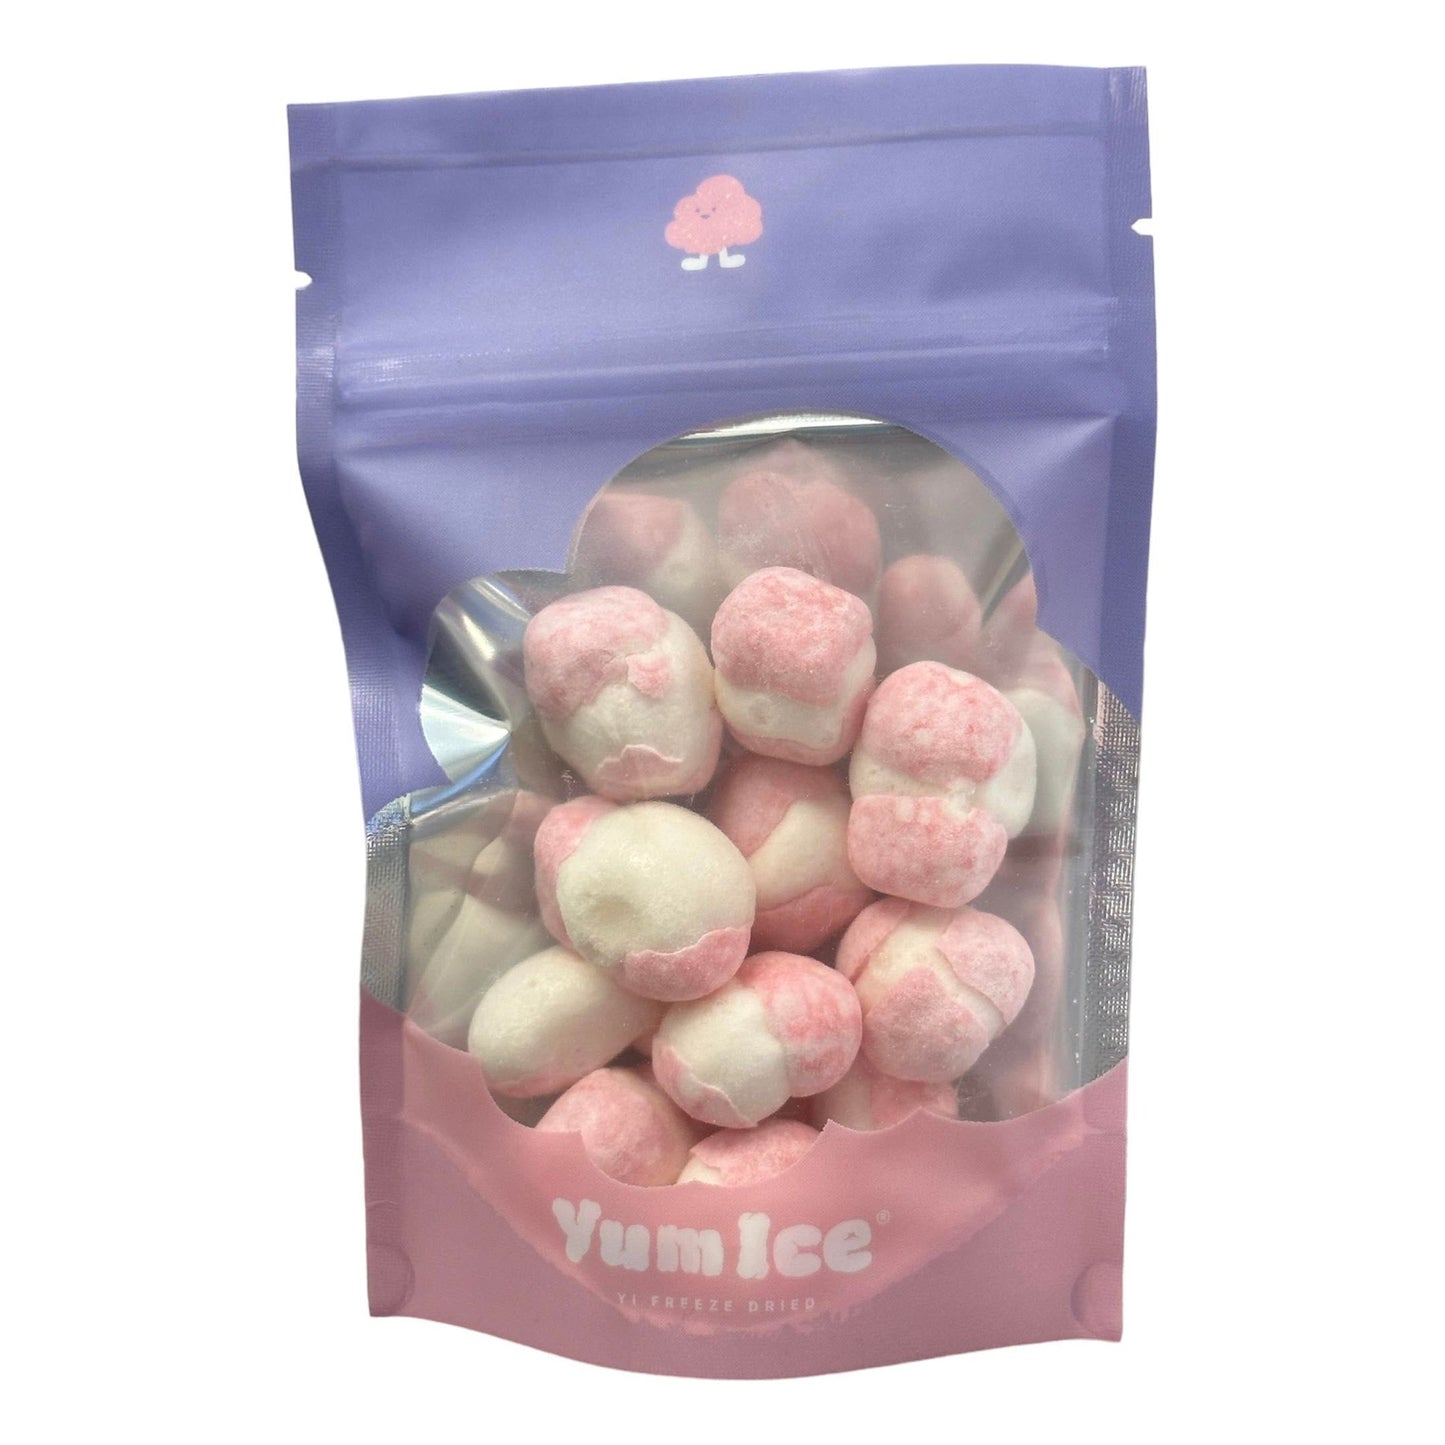 Yum Ice - Freeze Dried Strawberry BonBons 12ct (candynow.ca Exclusive)